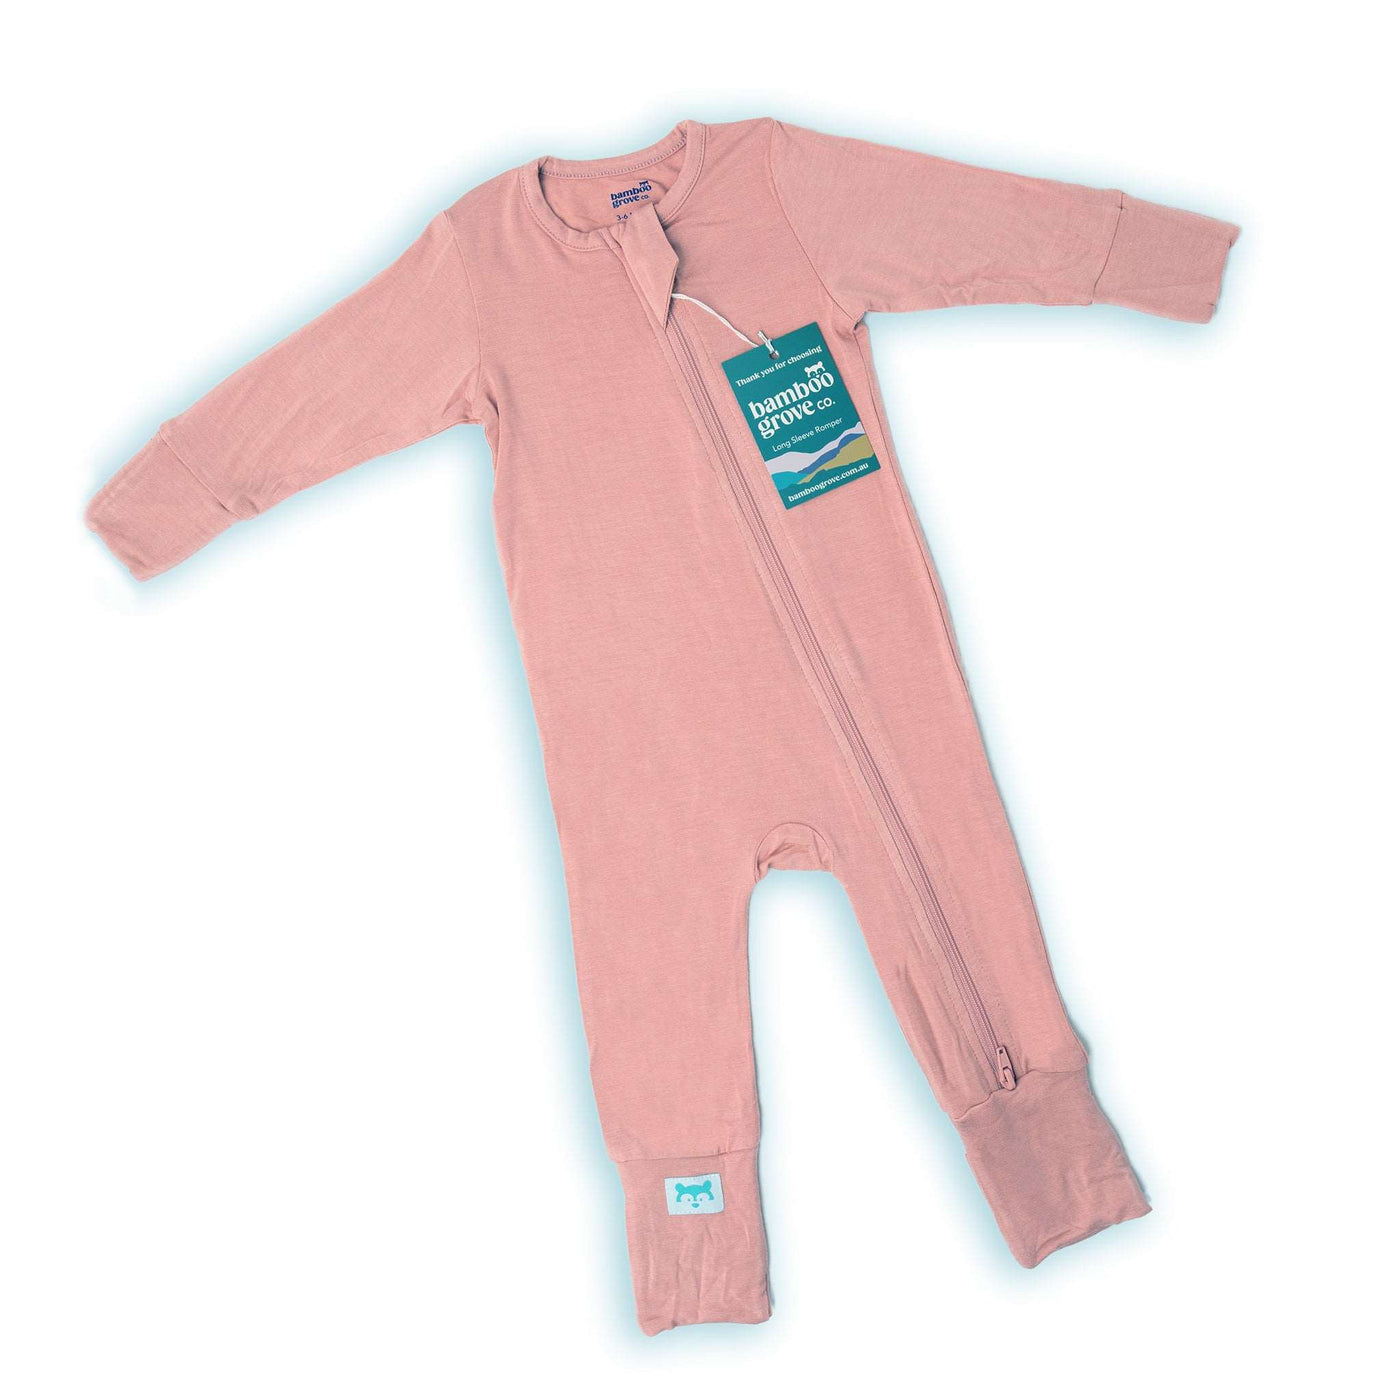 Matching romper for baby sleeping bag